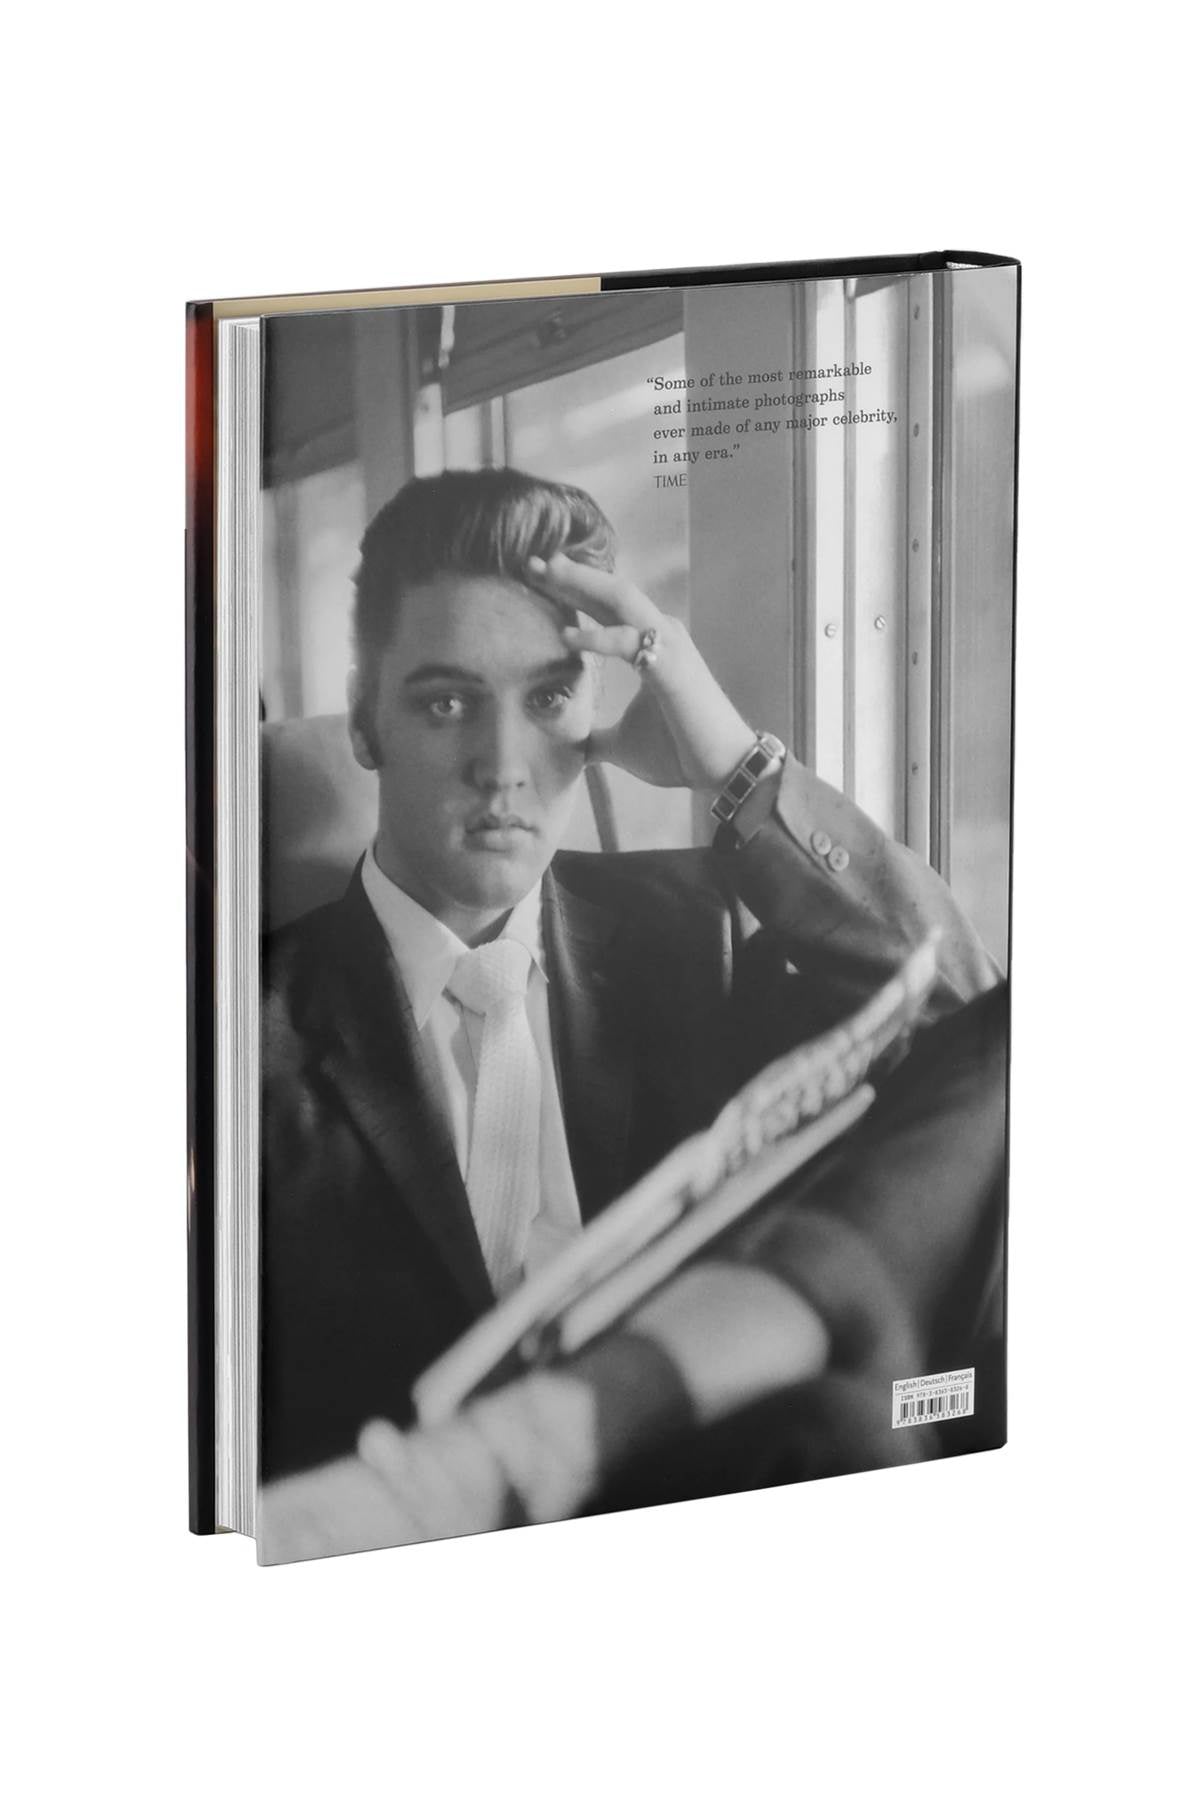 New mags elvis and the birth of rock and roll-1